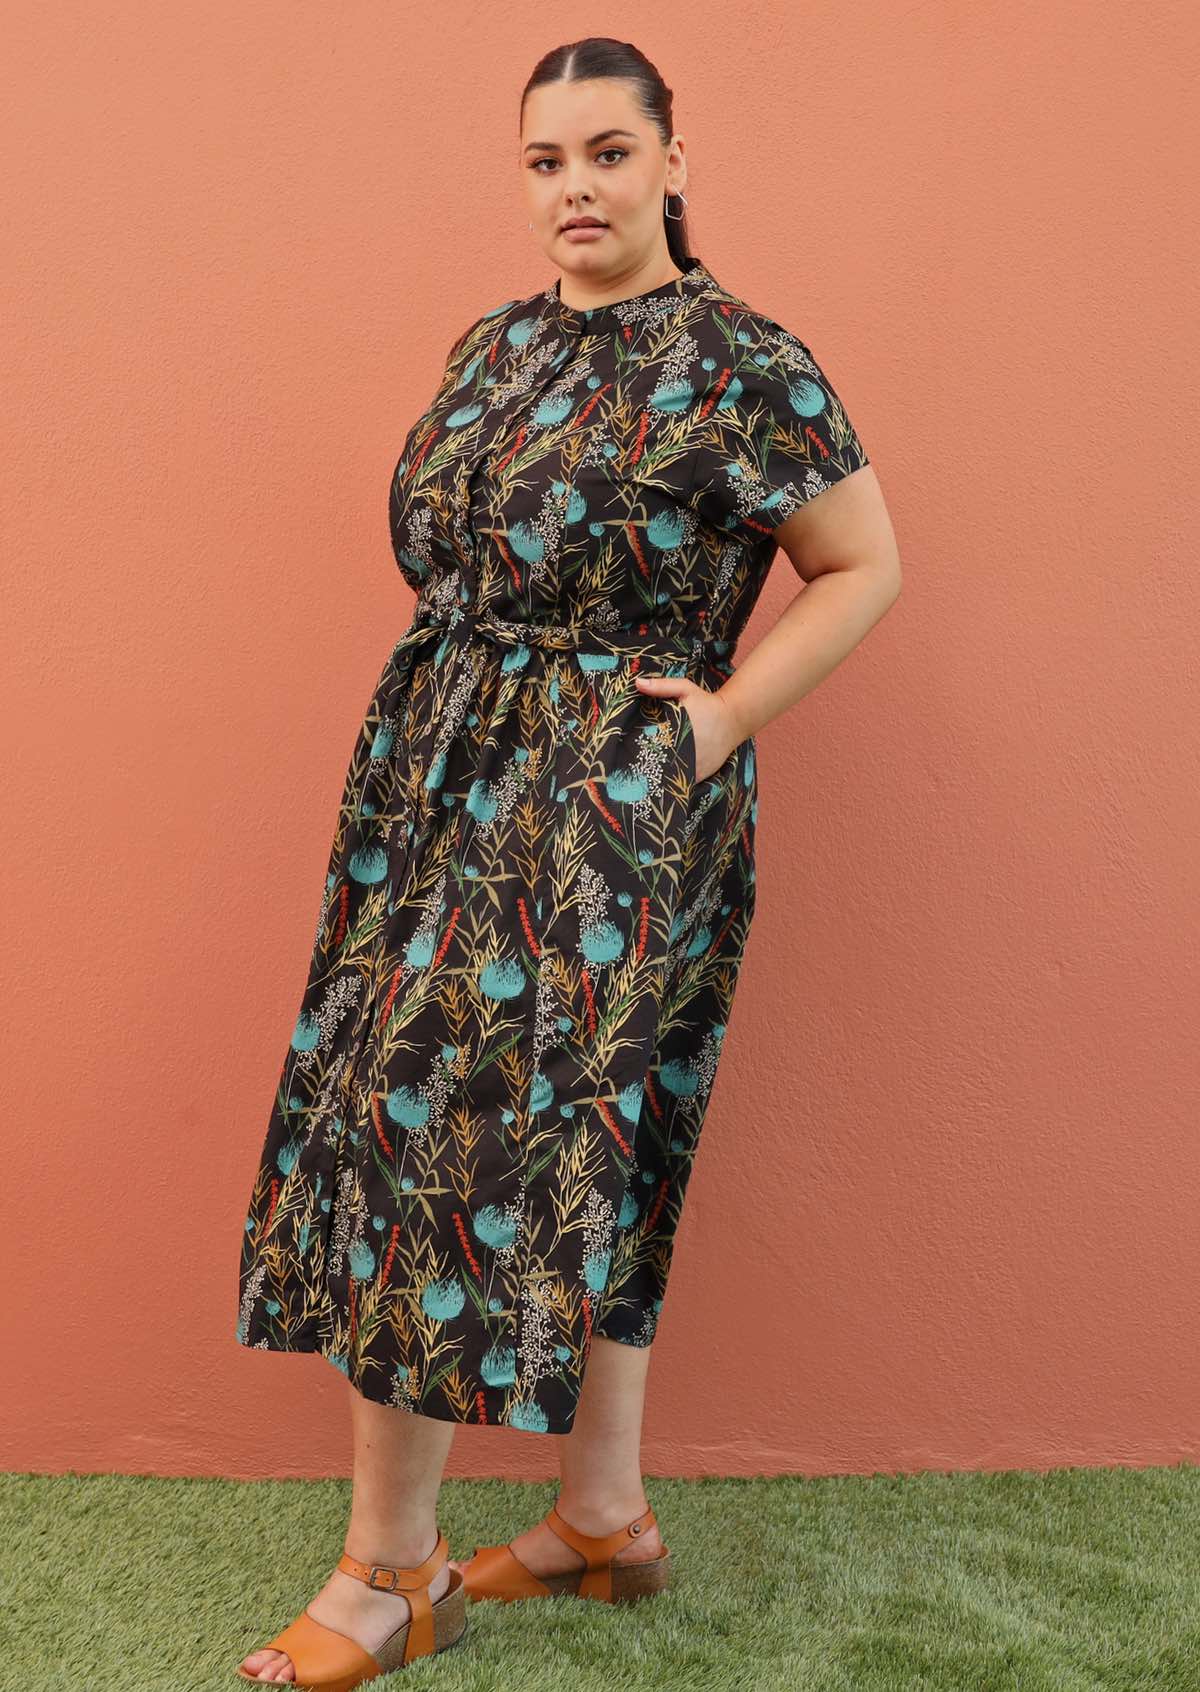 Plus size model wearing Vivien dress in black and teal with pockets and mandarin collar